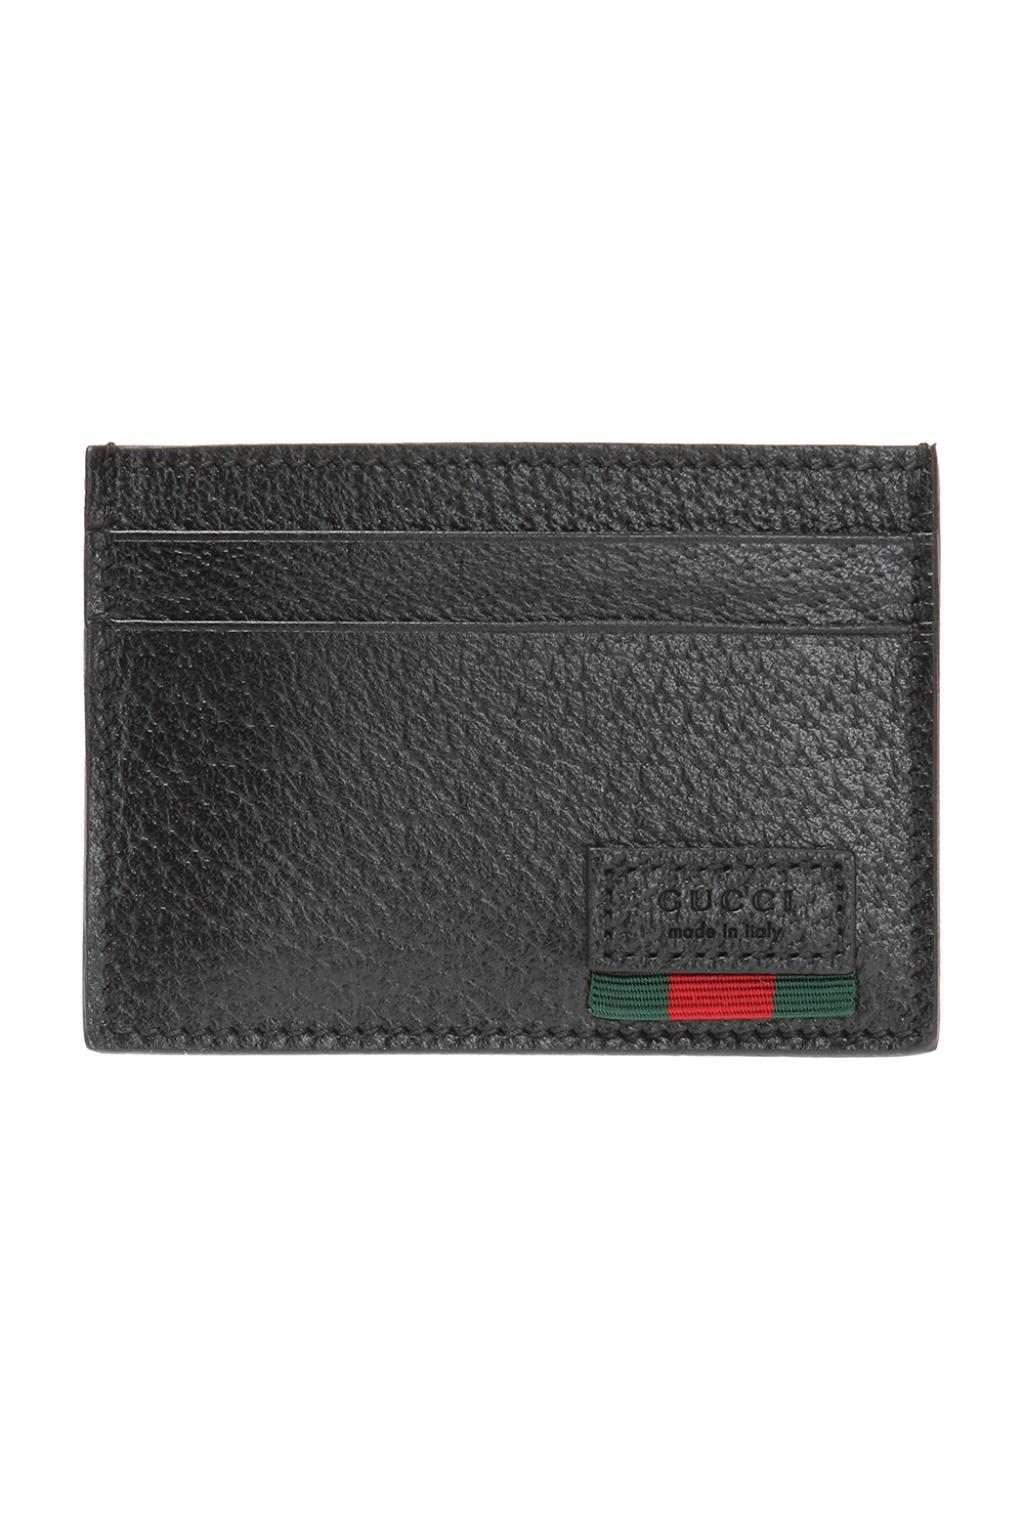 gucci card holder with money clip